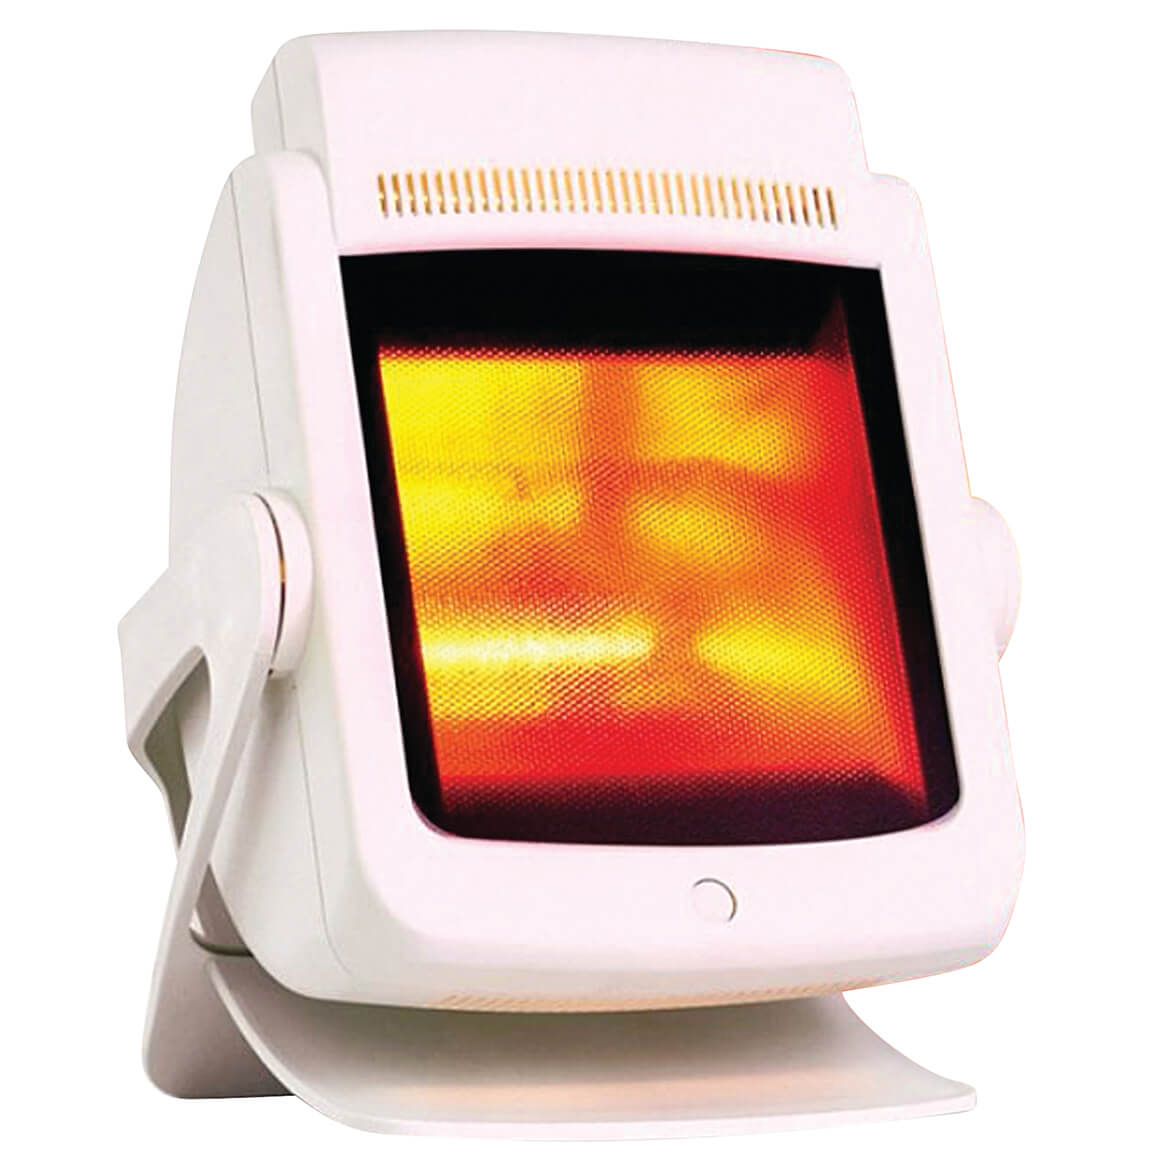 Theralamp Infrared Pain Relief Lamp + '-' + 376839